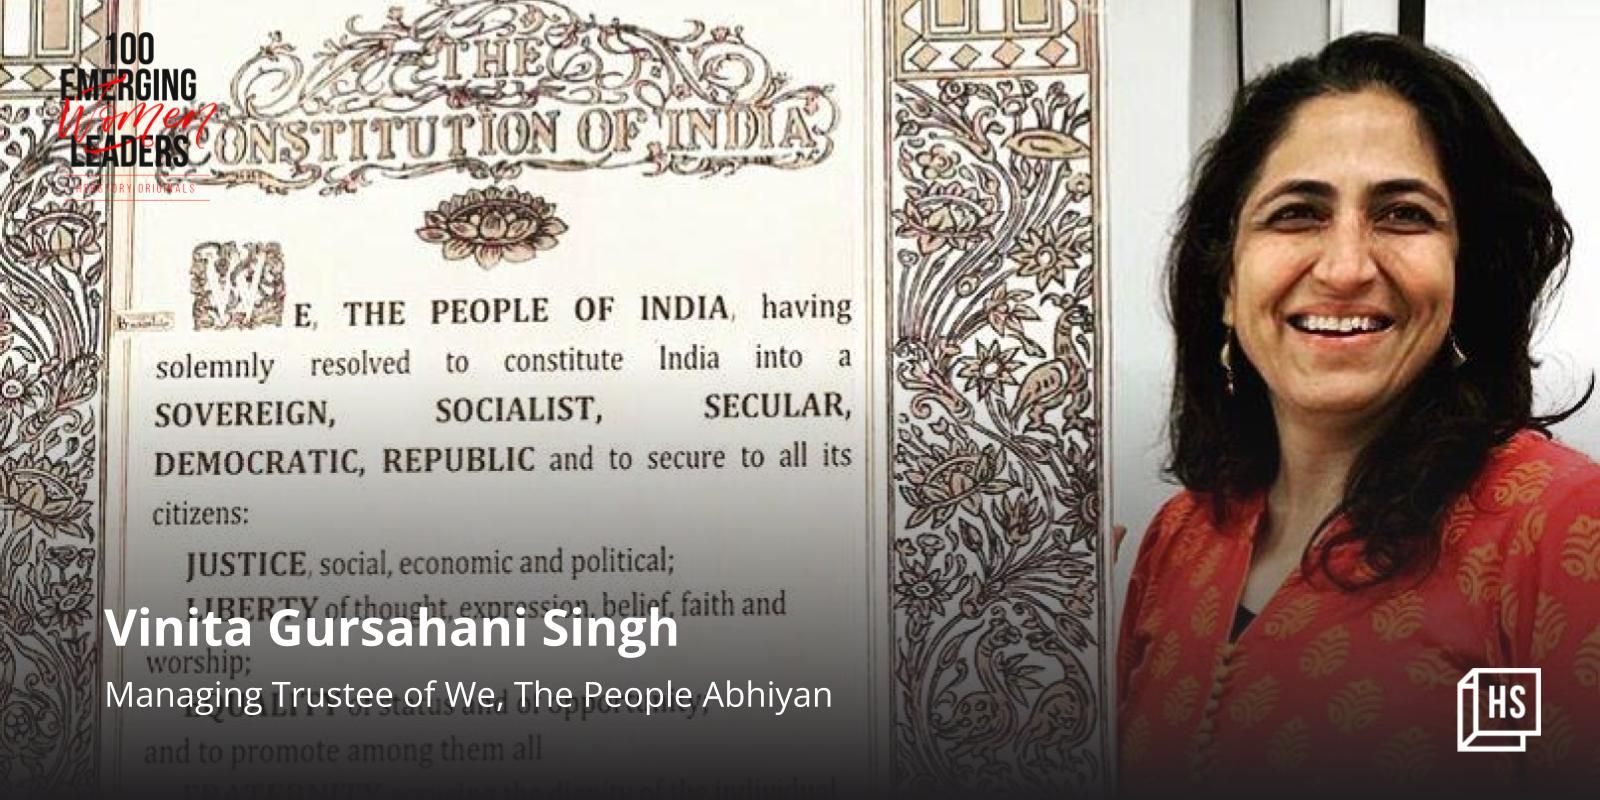 [100 Emerging Women Leaders] How Vinita Gursahani Singh is empowering Indians to know their rights
